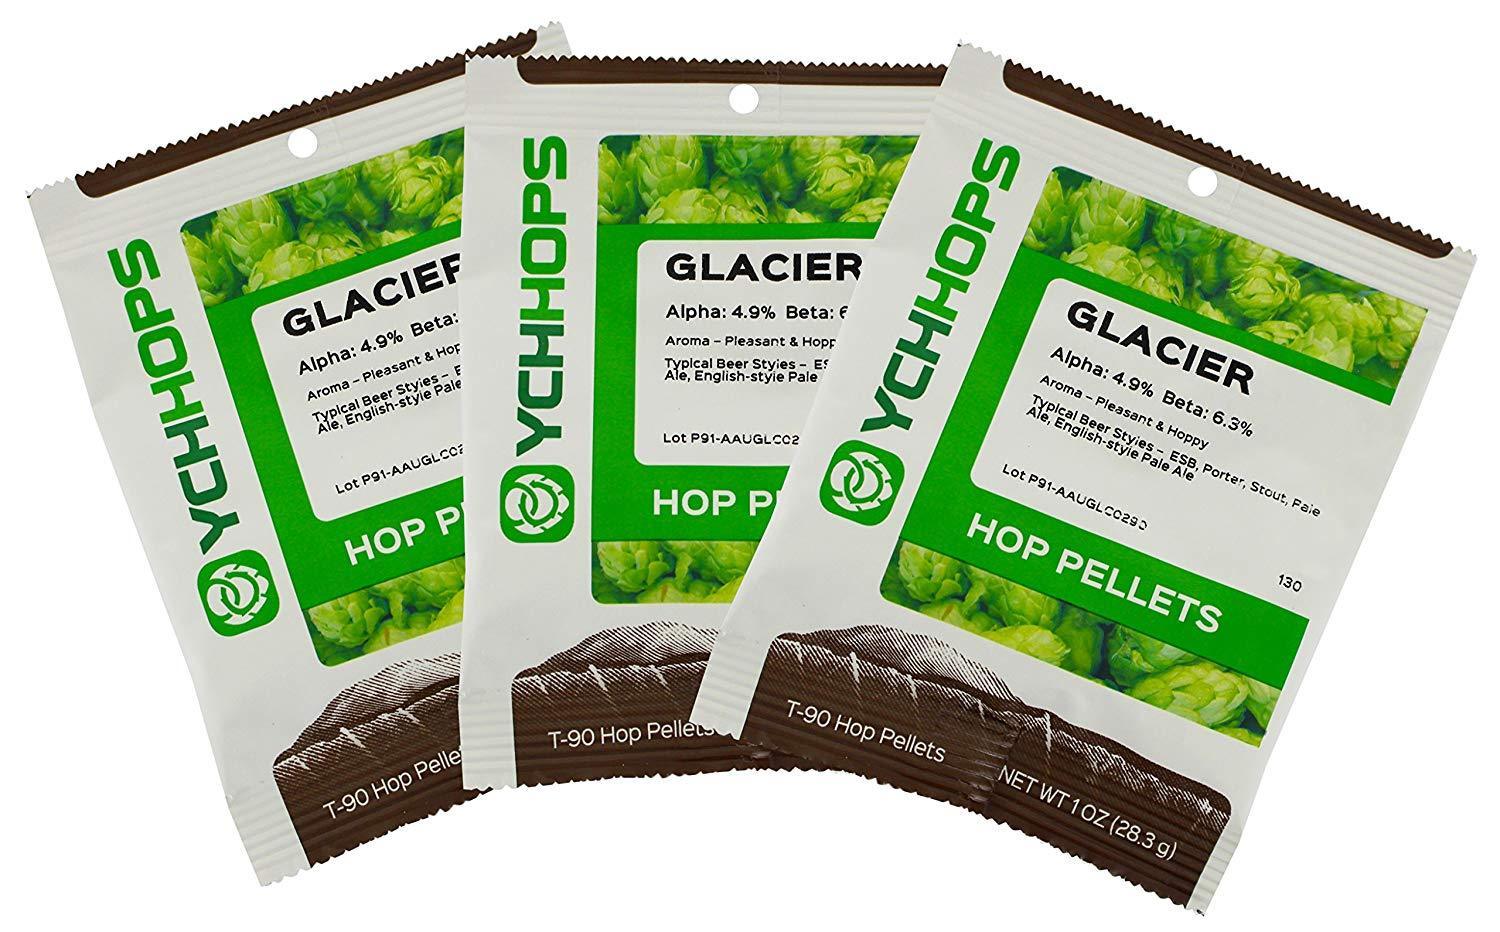 GLACIER HOP PELLETS SMOOTH AND FRUITY BLACKBERRY AROMA 1oz FACTORY PACK 